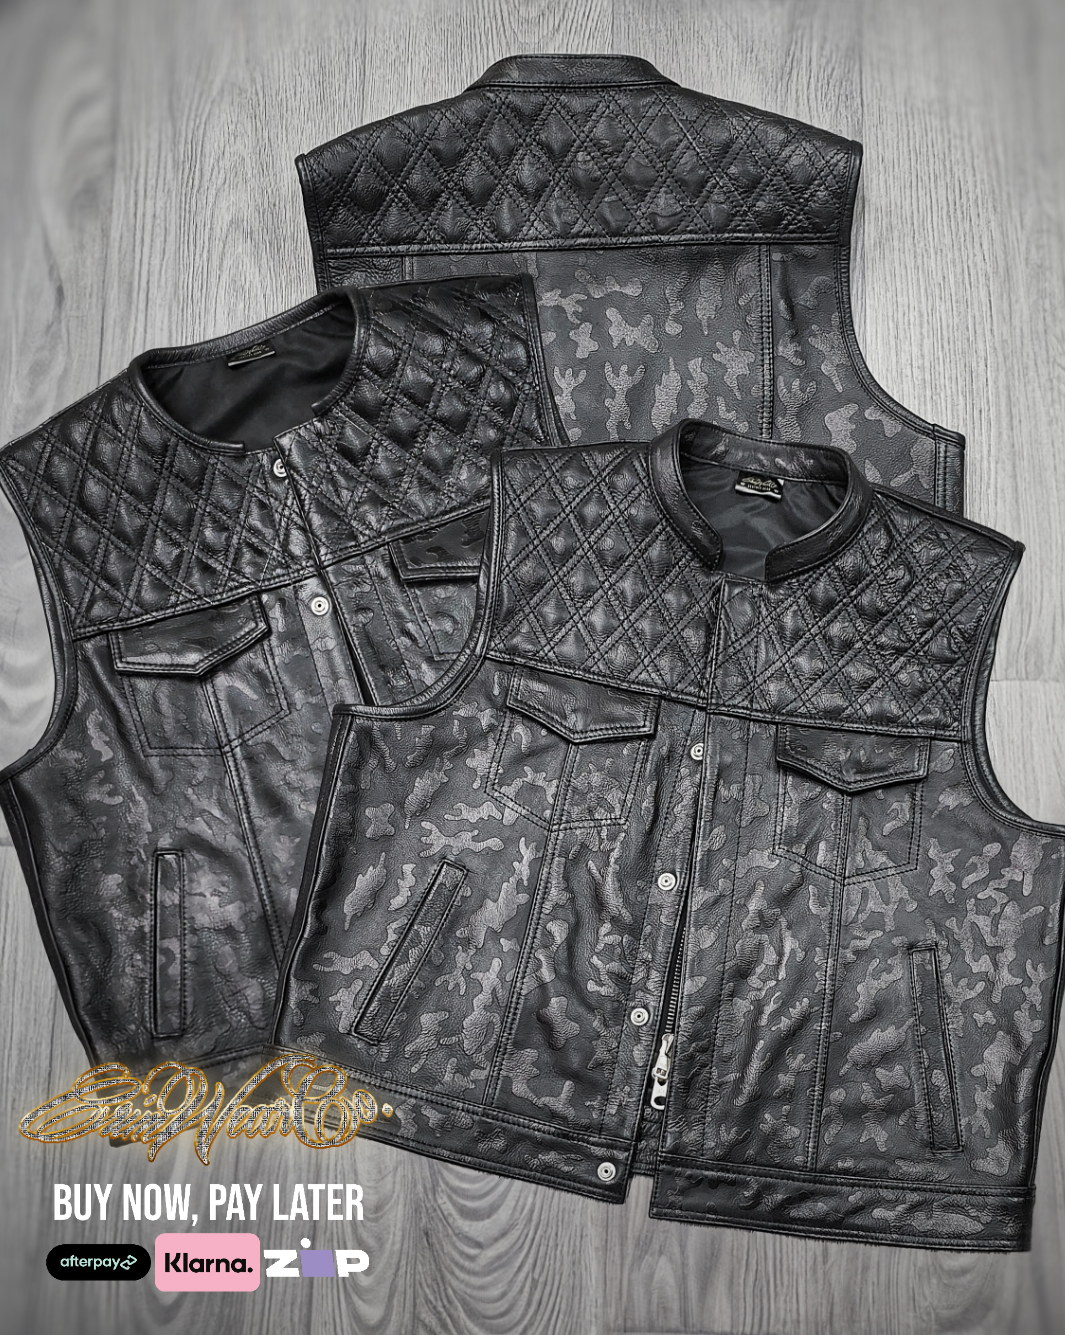 US "OFF THE RACK" NIGHT OPS VEST